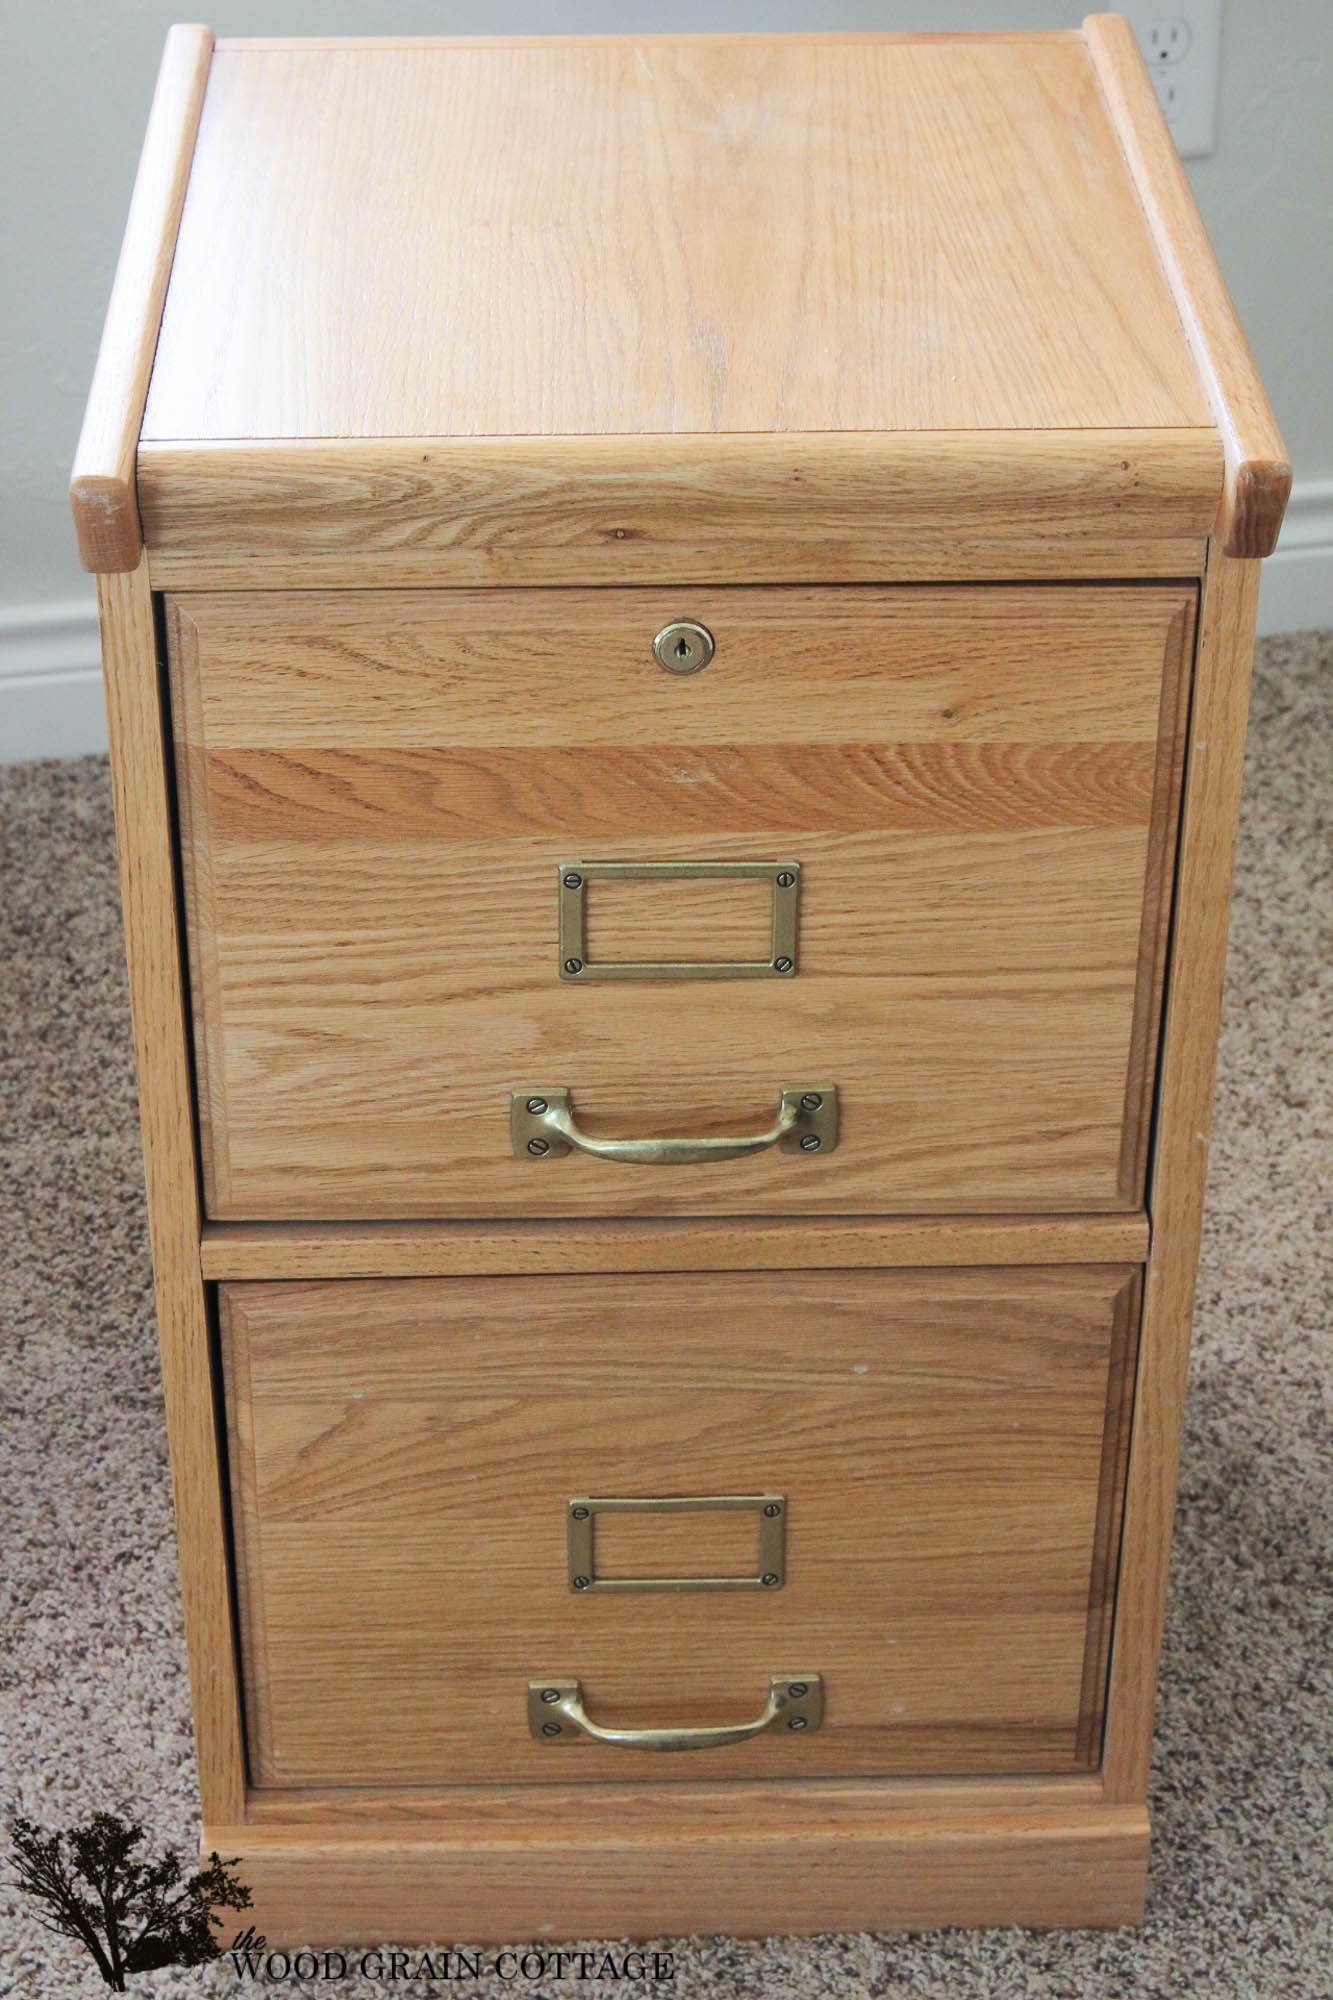 How To Paint A Filing Cabinet The Wood Grain Cottage